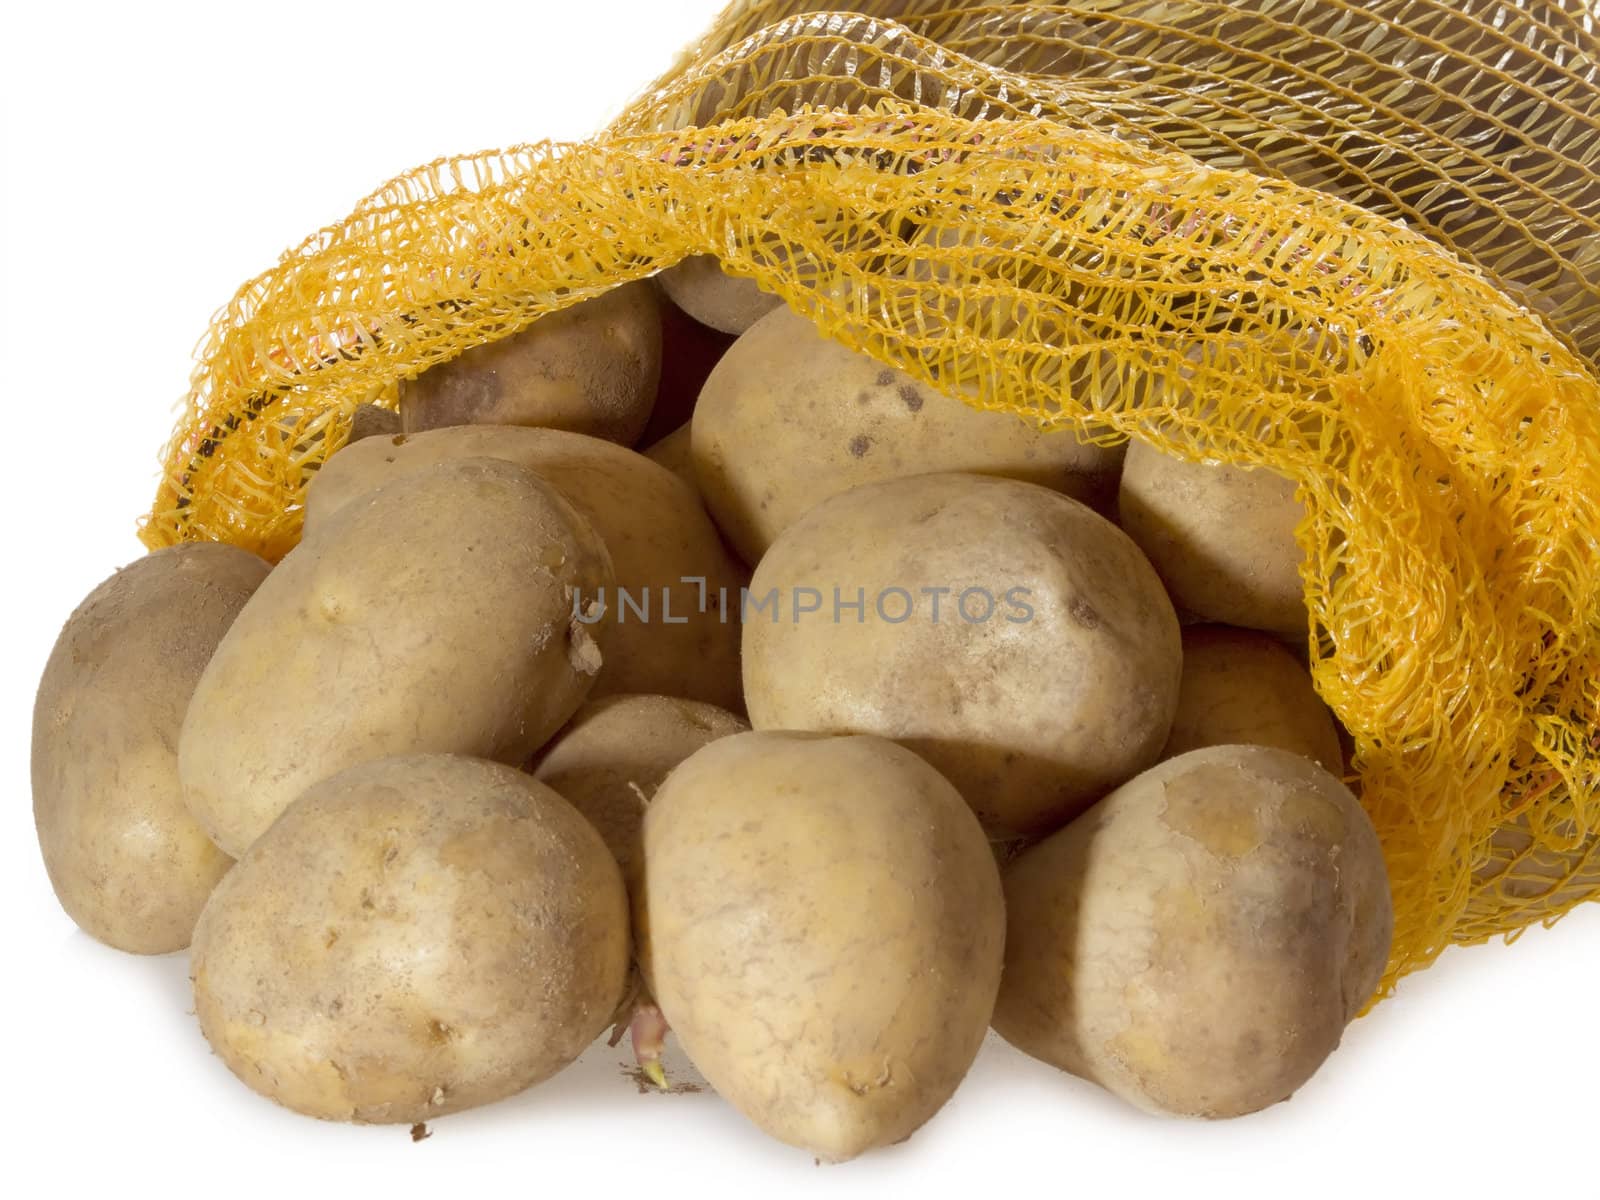 Potatoes in a sack on bright background